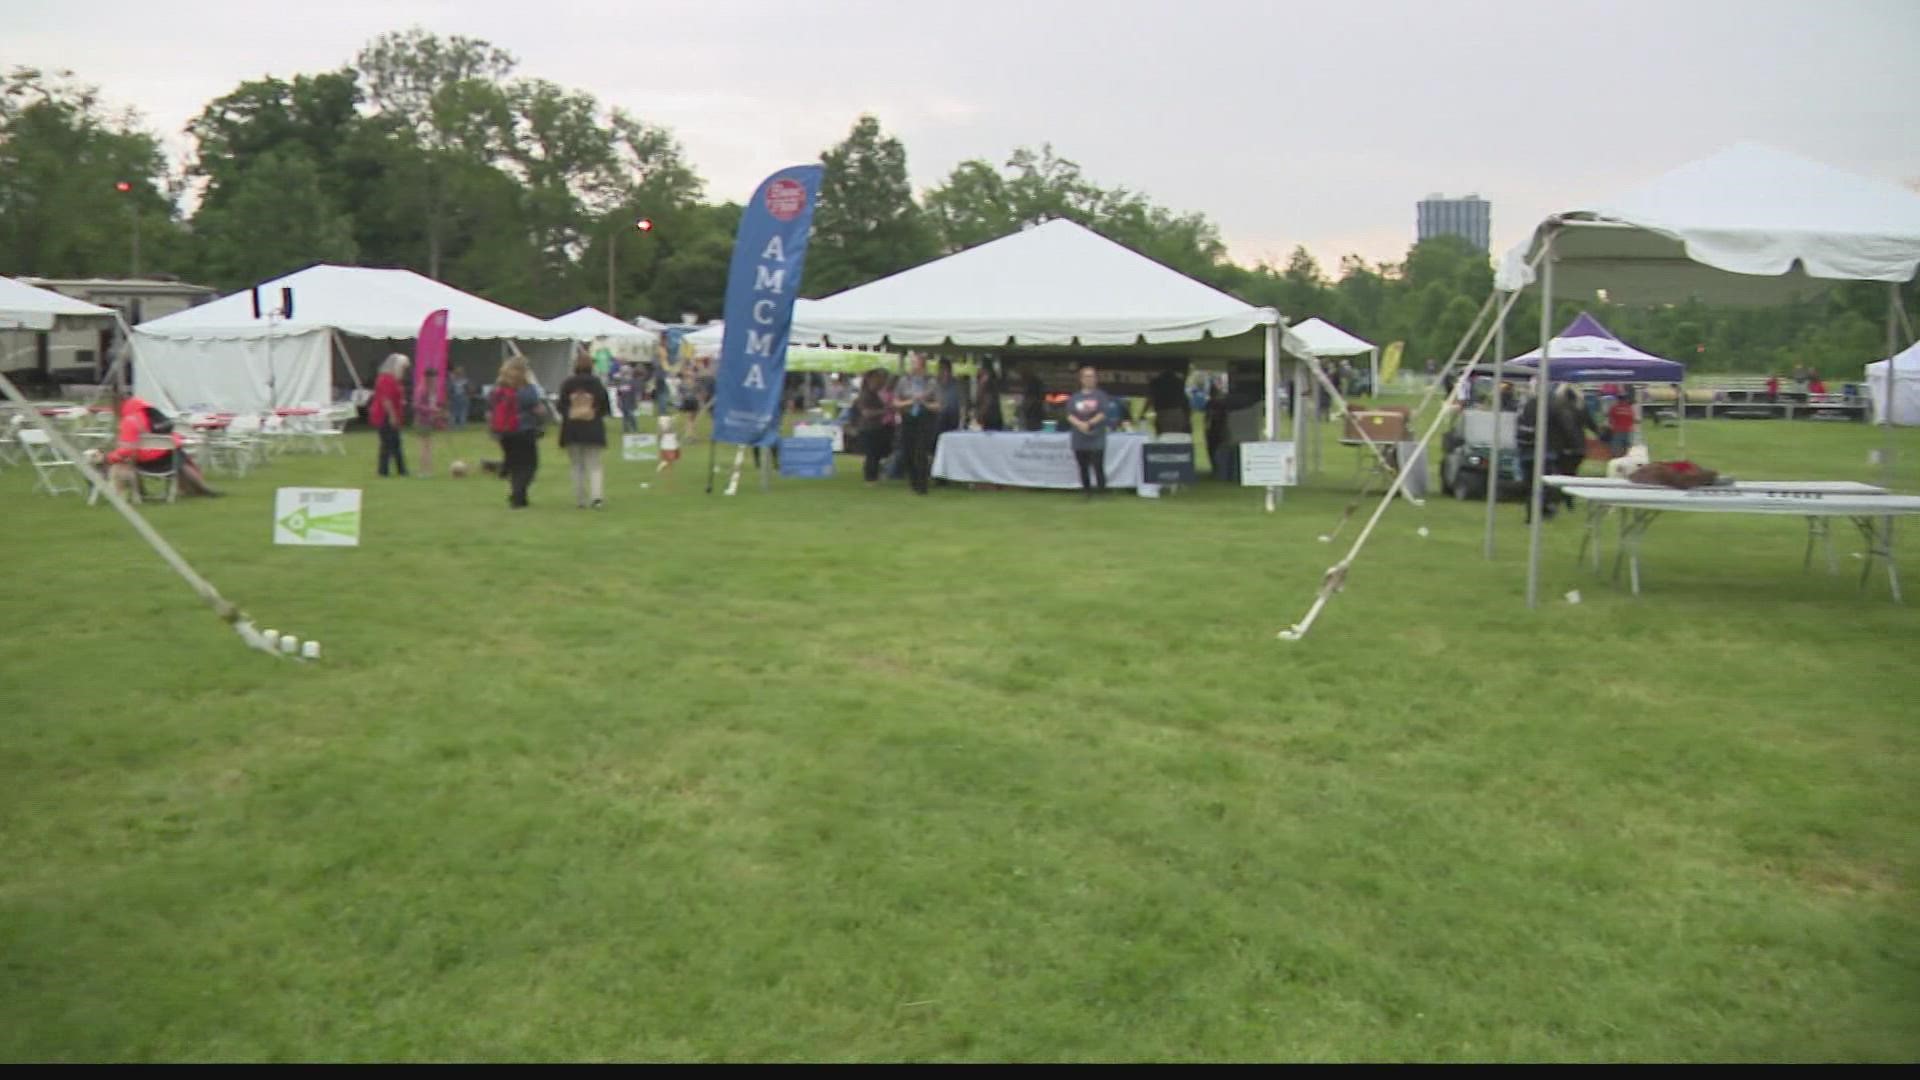 After a 2 year hiatus, Bark in the park returned to Forest Park this weekend. Due to the weather, the event had to be canceled halfway though.